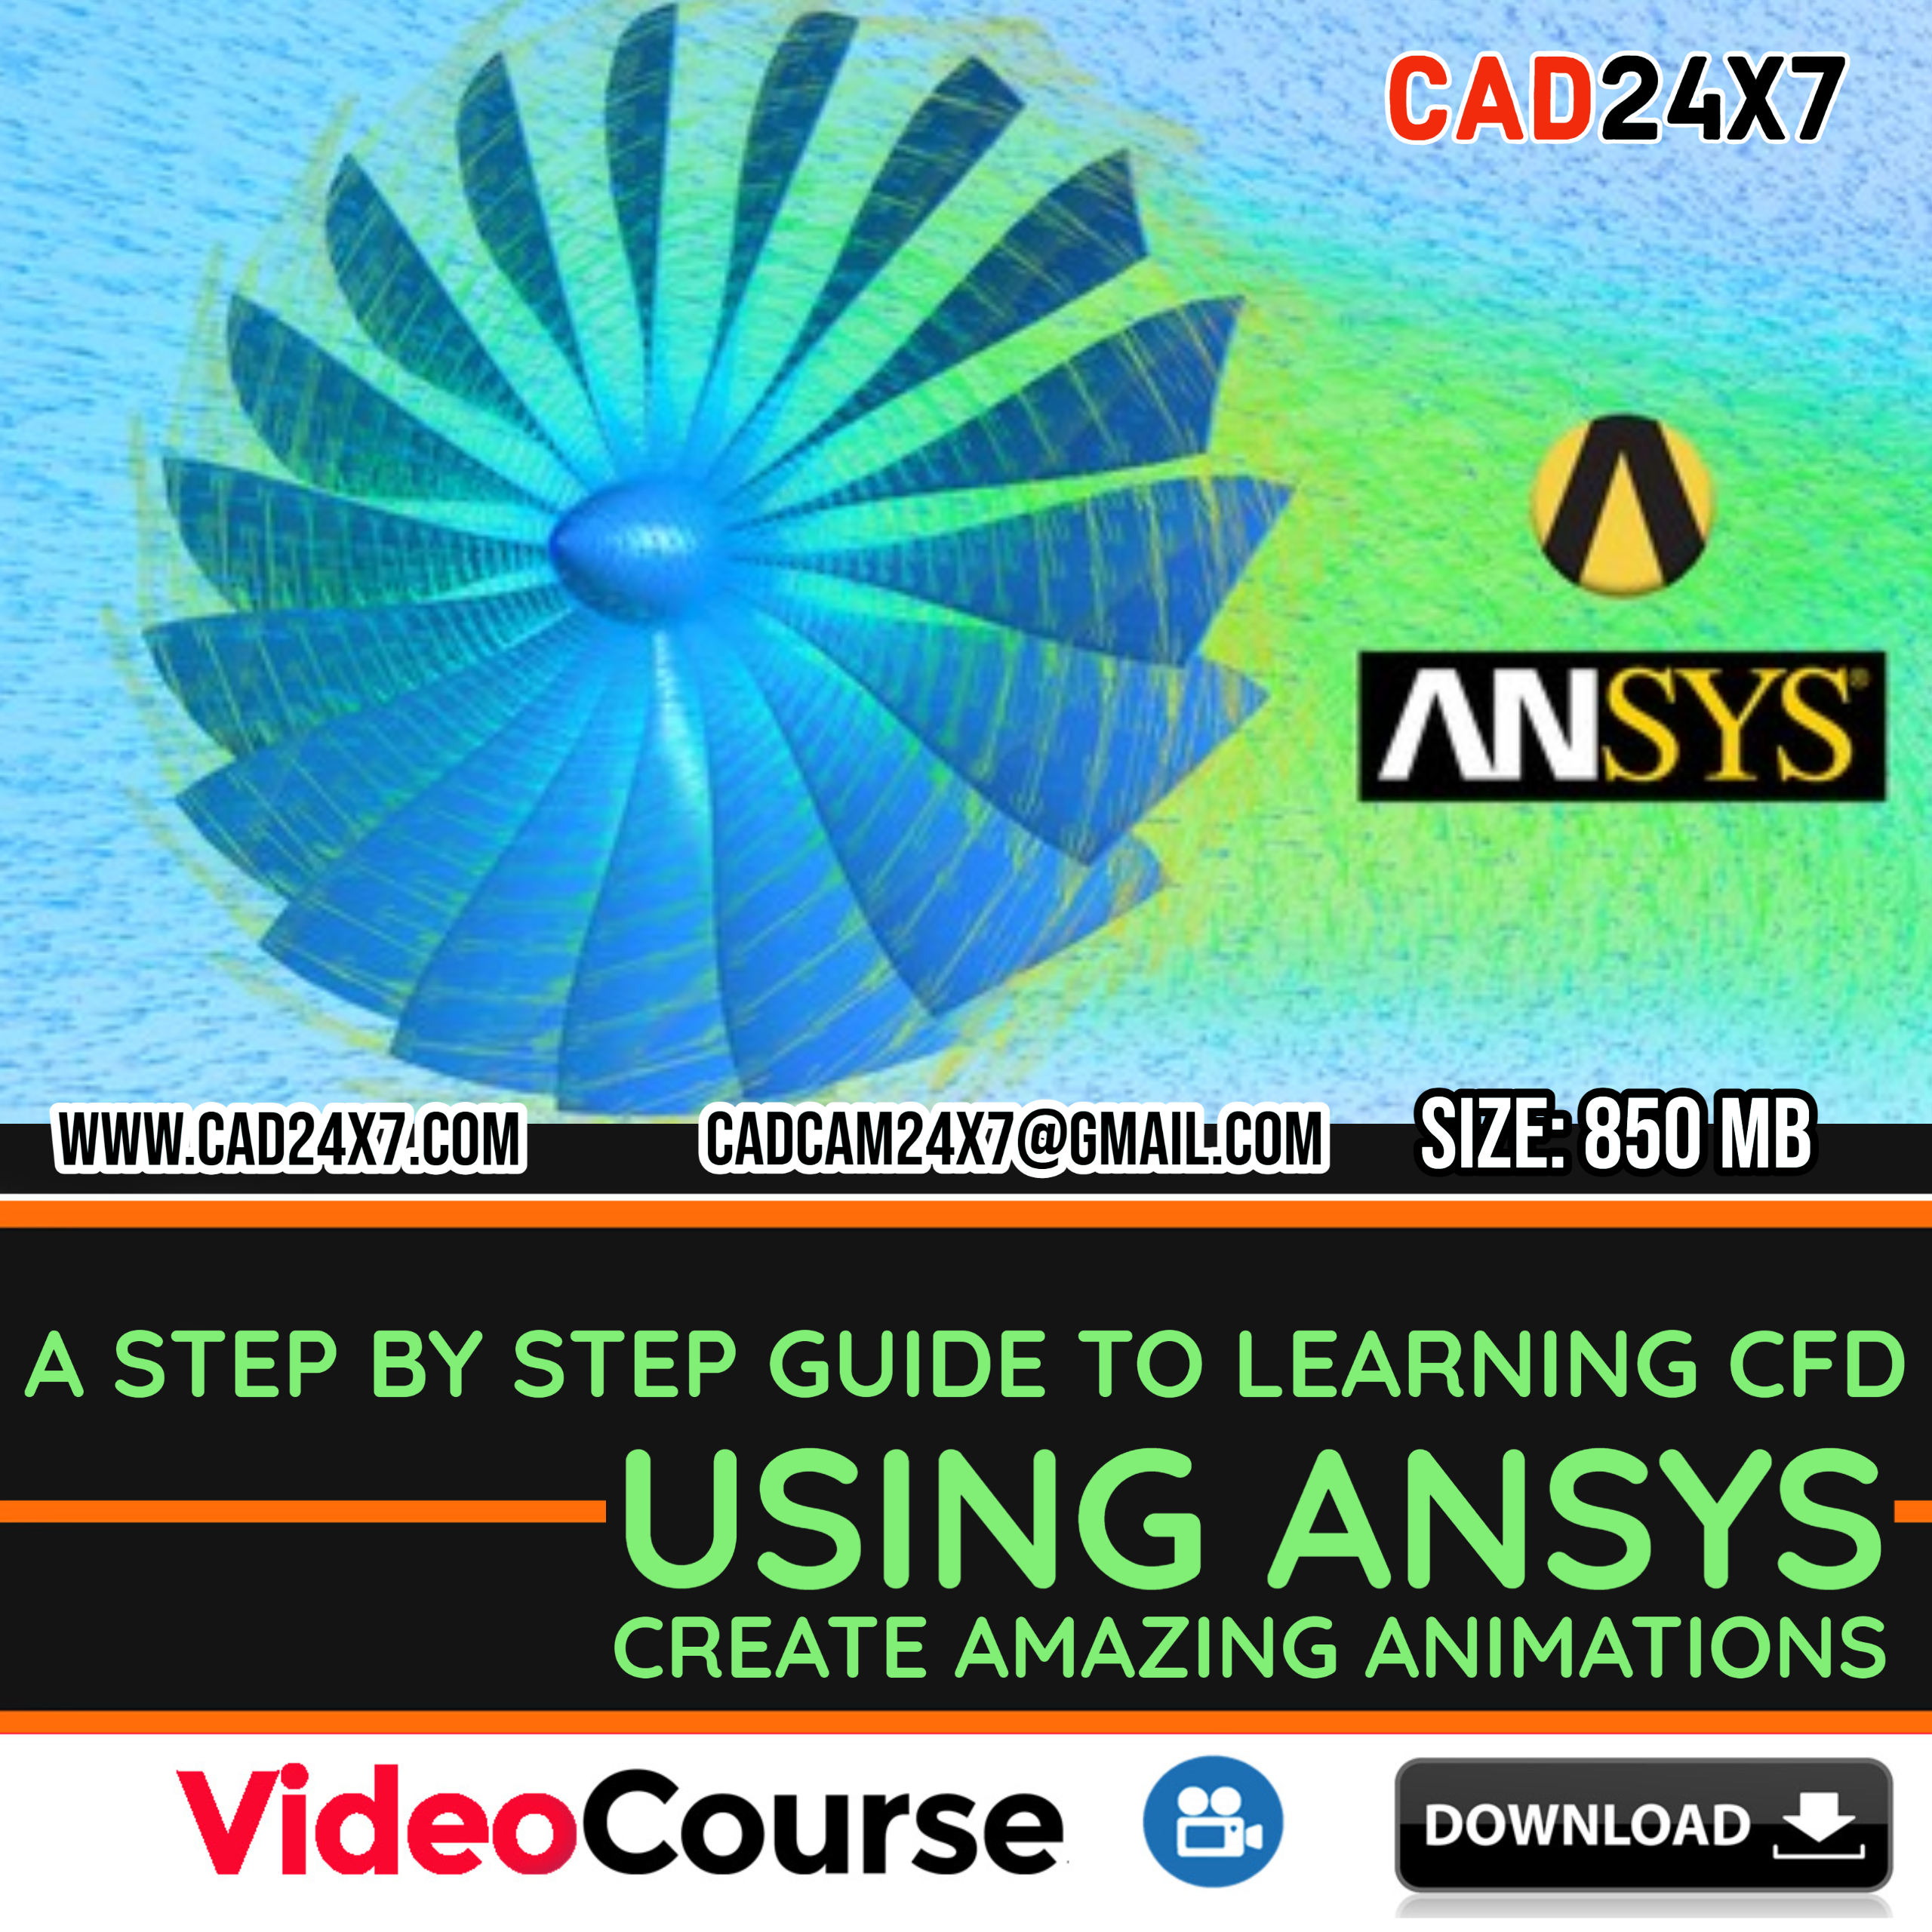 A Step by Step Guide to Learning CFD using ANSYS Create Amazing Animations-XCOD